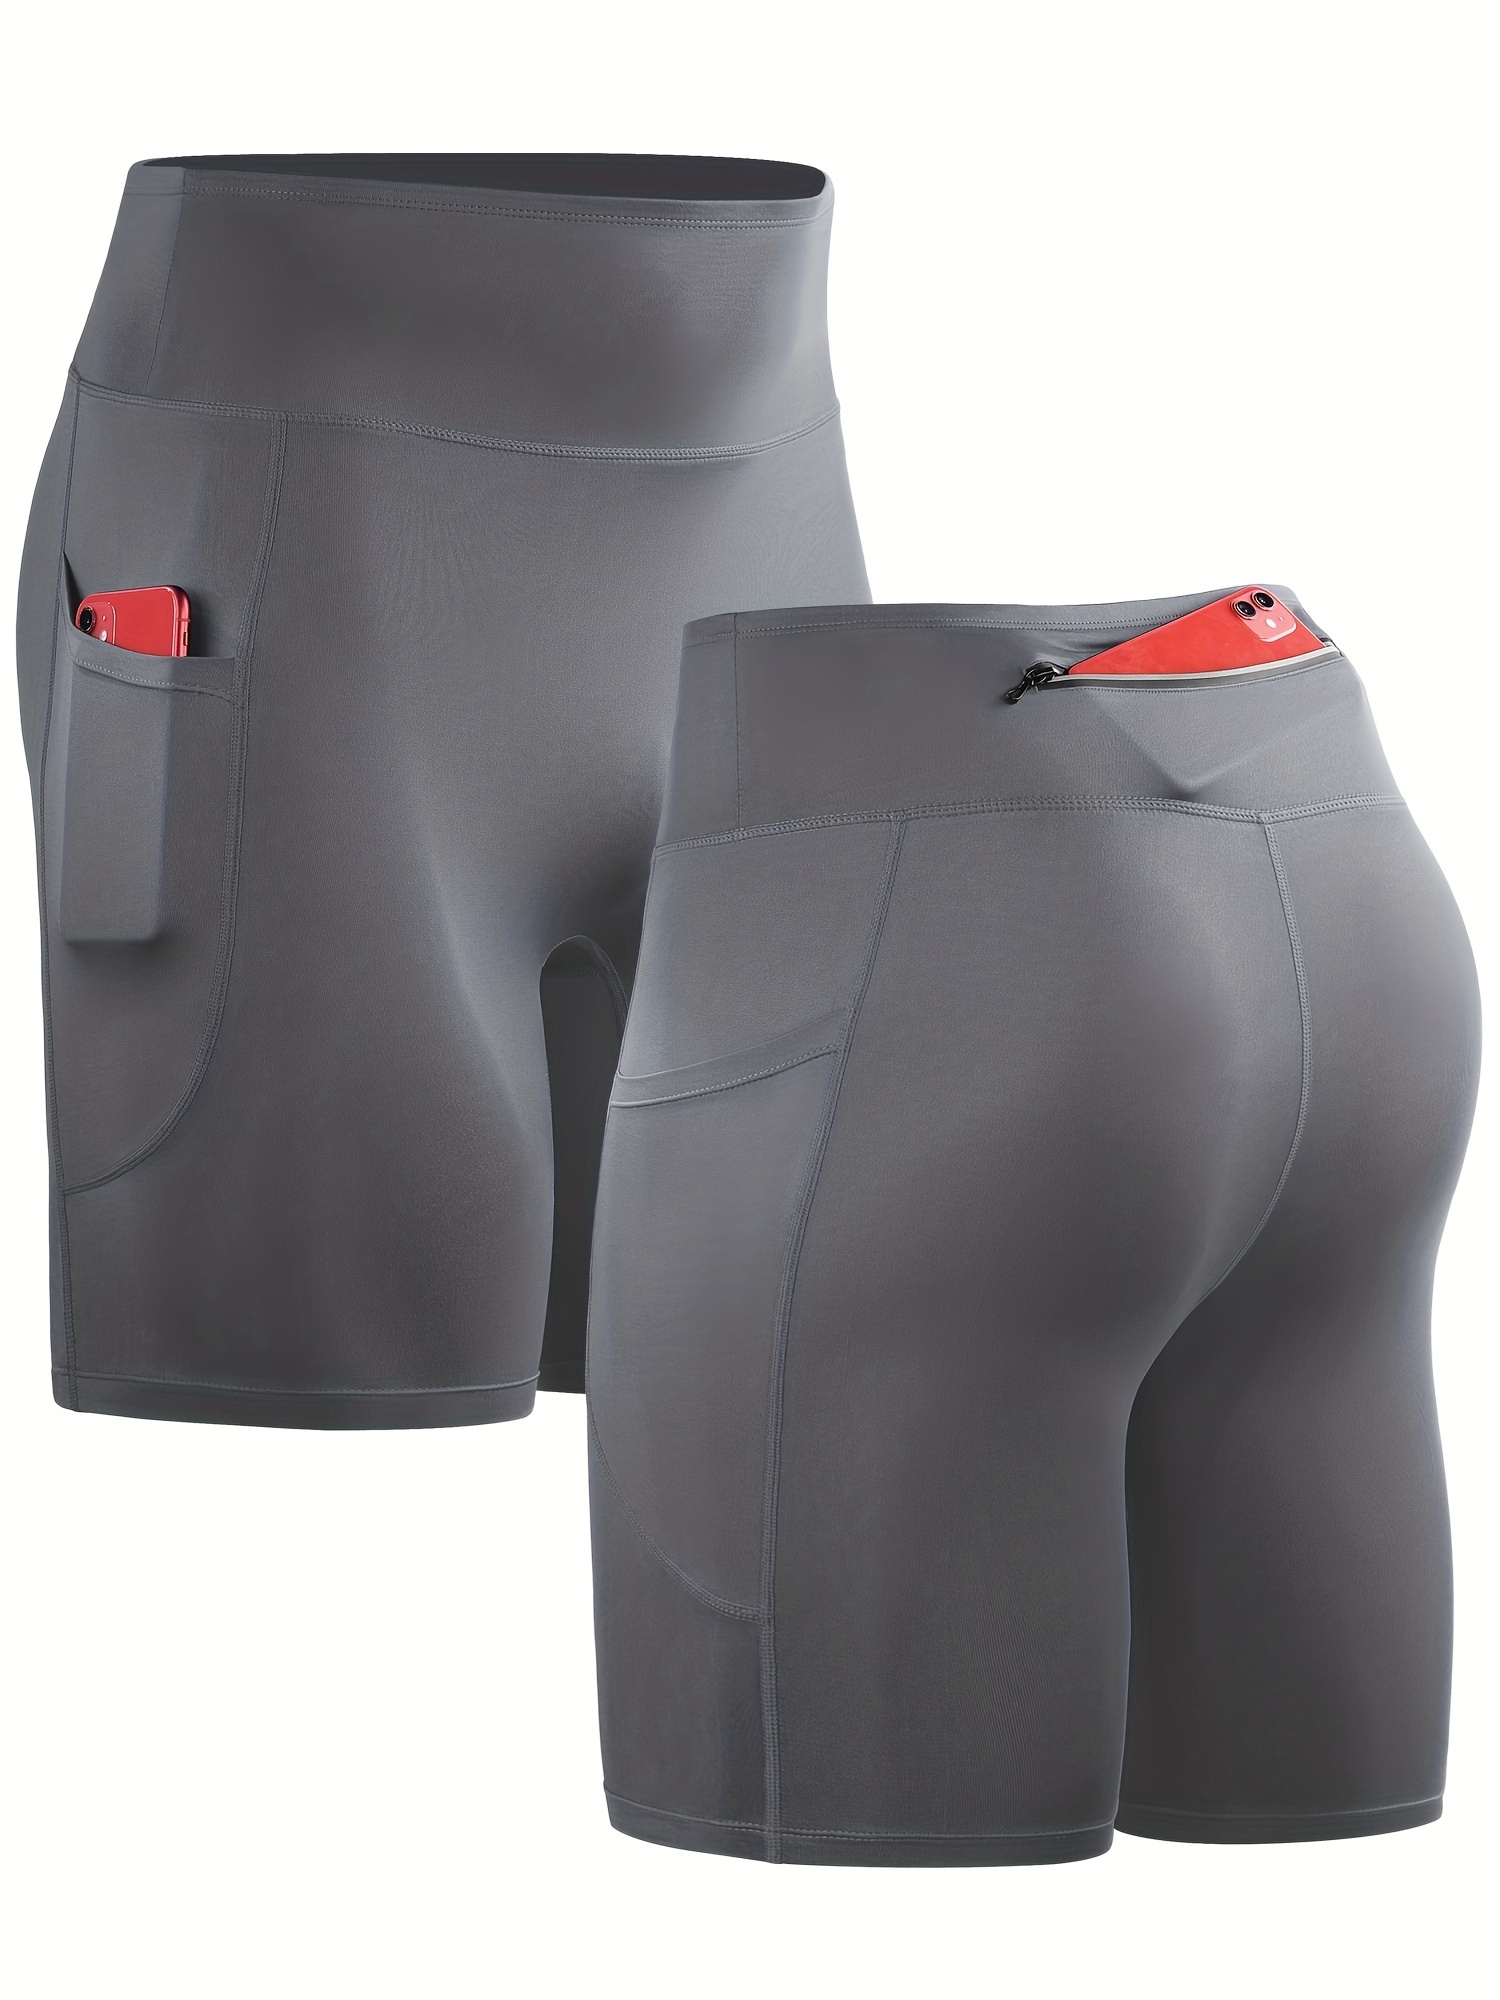 Women's Compression Shorts with Pocket